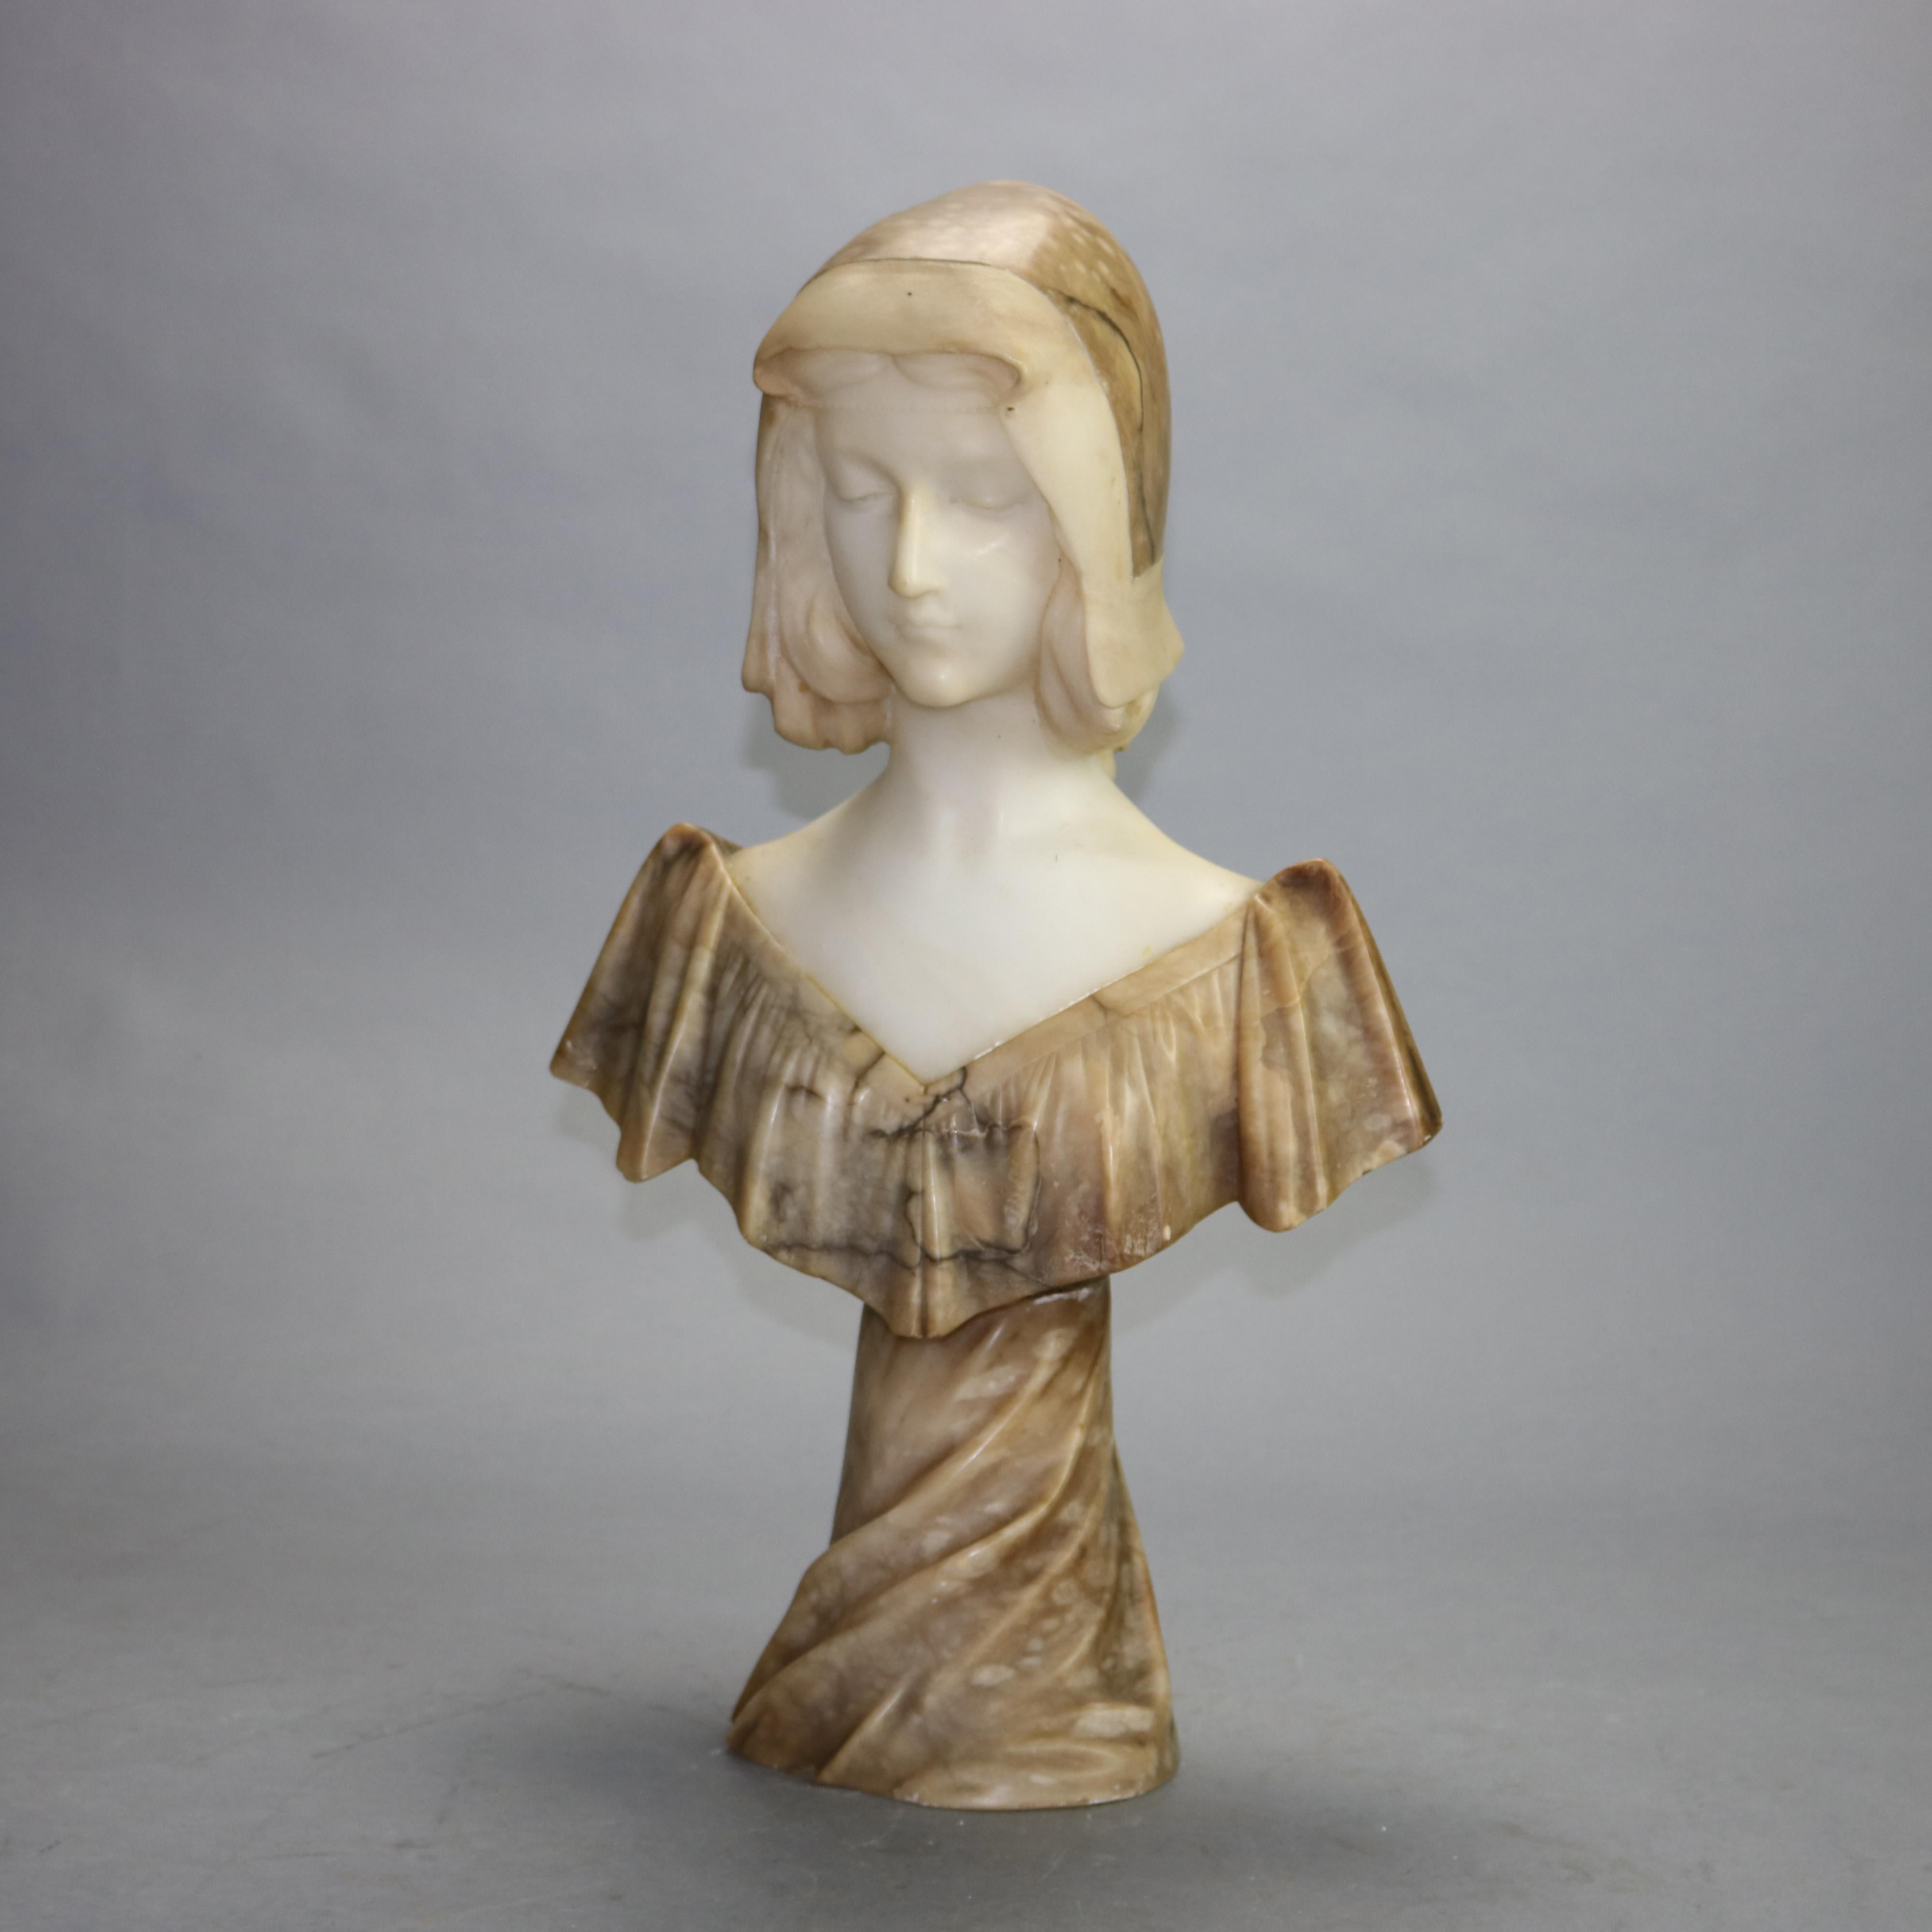 An antique Italian sculpture by A. Gennai (Italy, 19th C) offers carved marble and alabaster two-tone portrait bust of a young woman, en verso artist signed, c1890

Measures - 22.5''H x 13.5''W x 7.75''D.